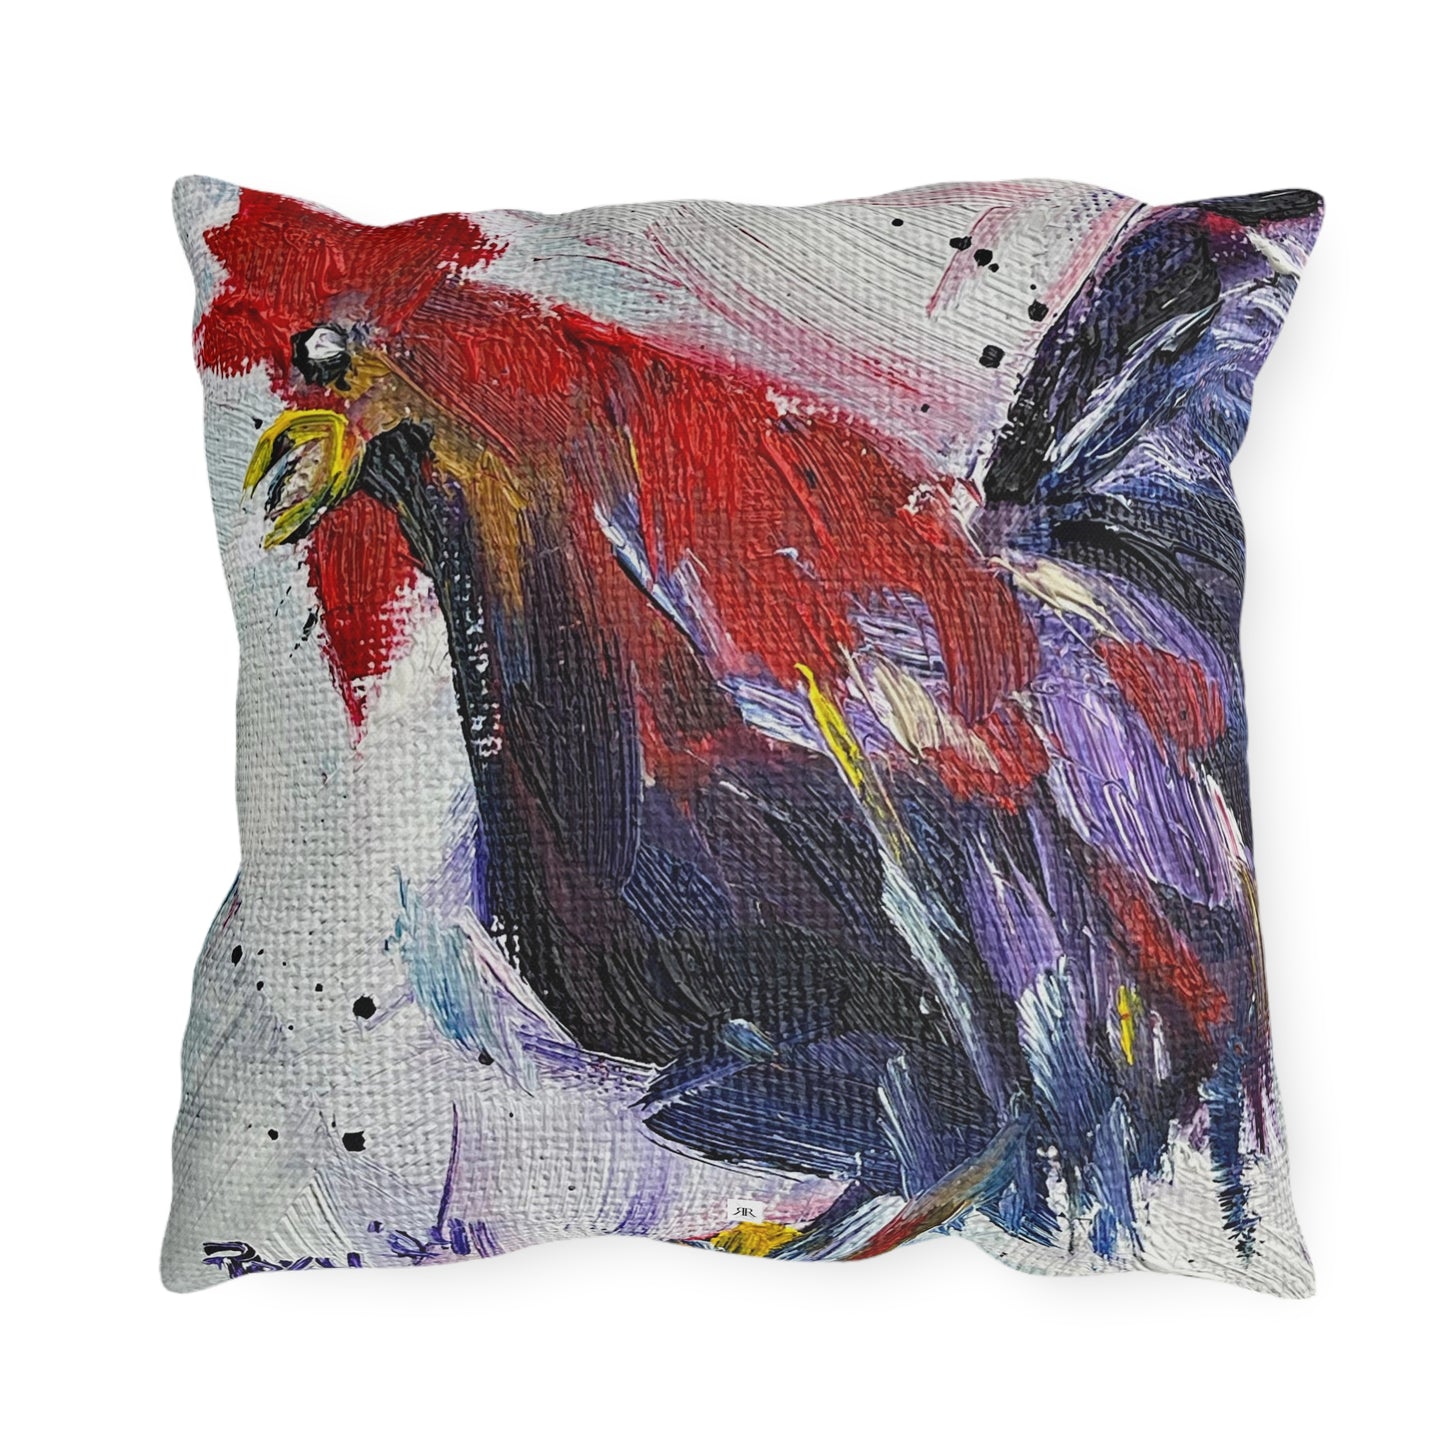 As the Rooster Crows Outdoor Pillows